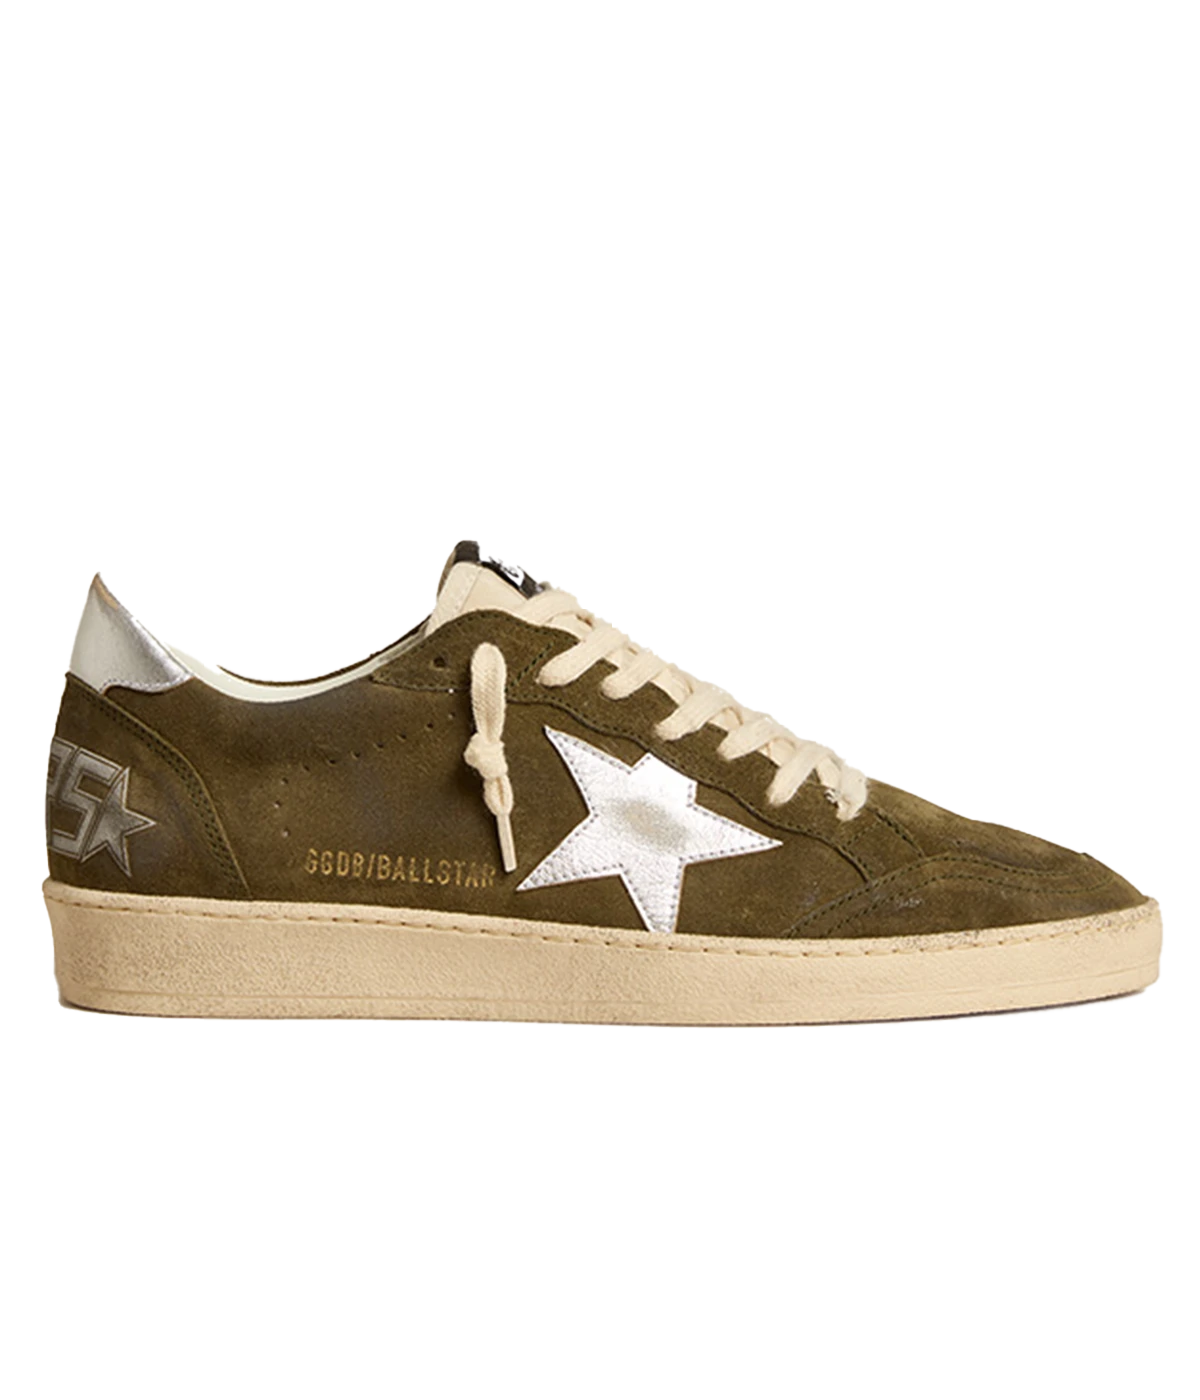 Ball Star Sneakers in Olive Night & Silver